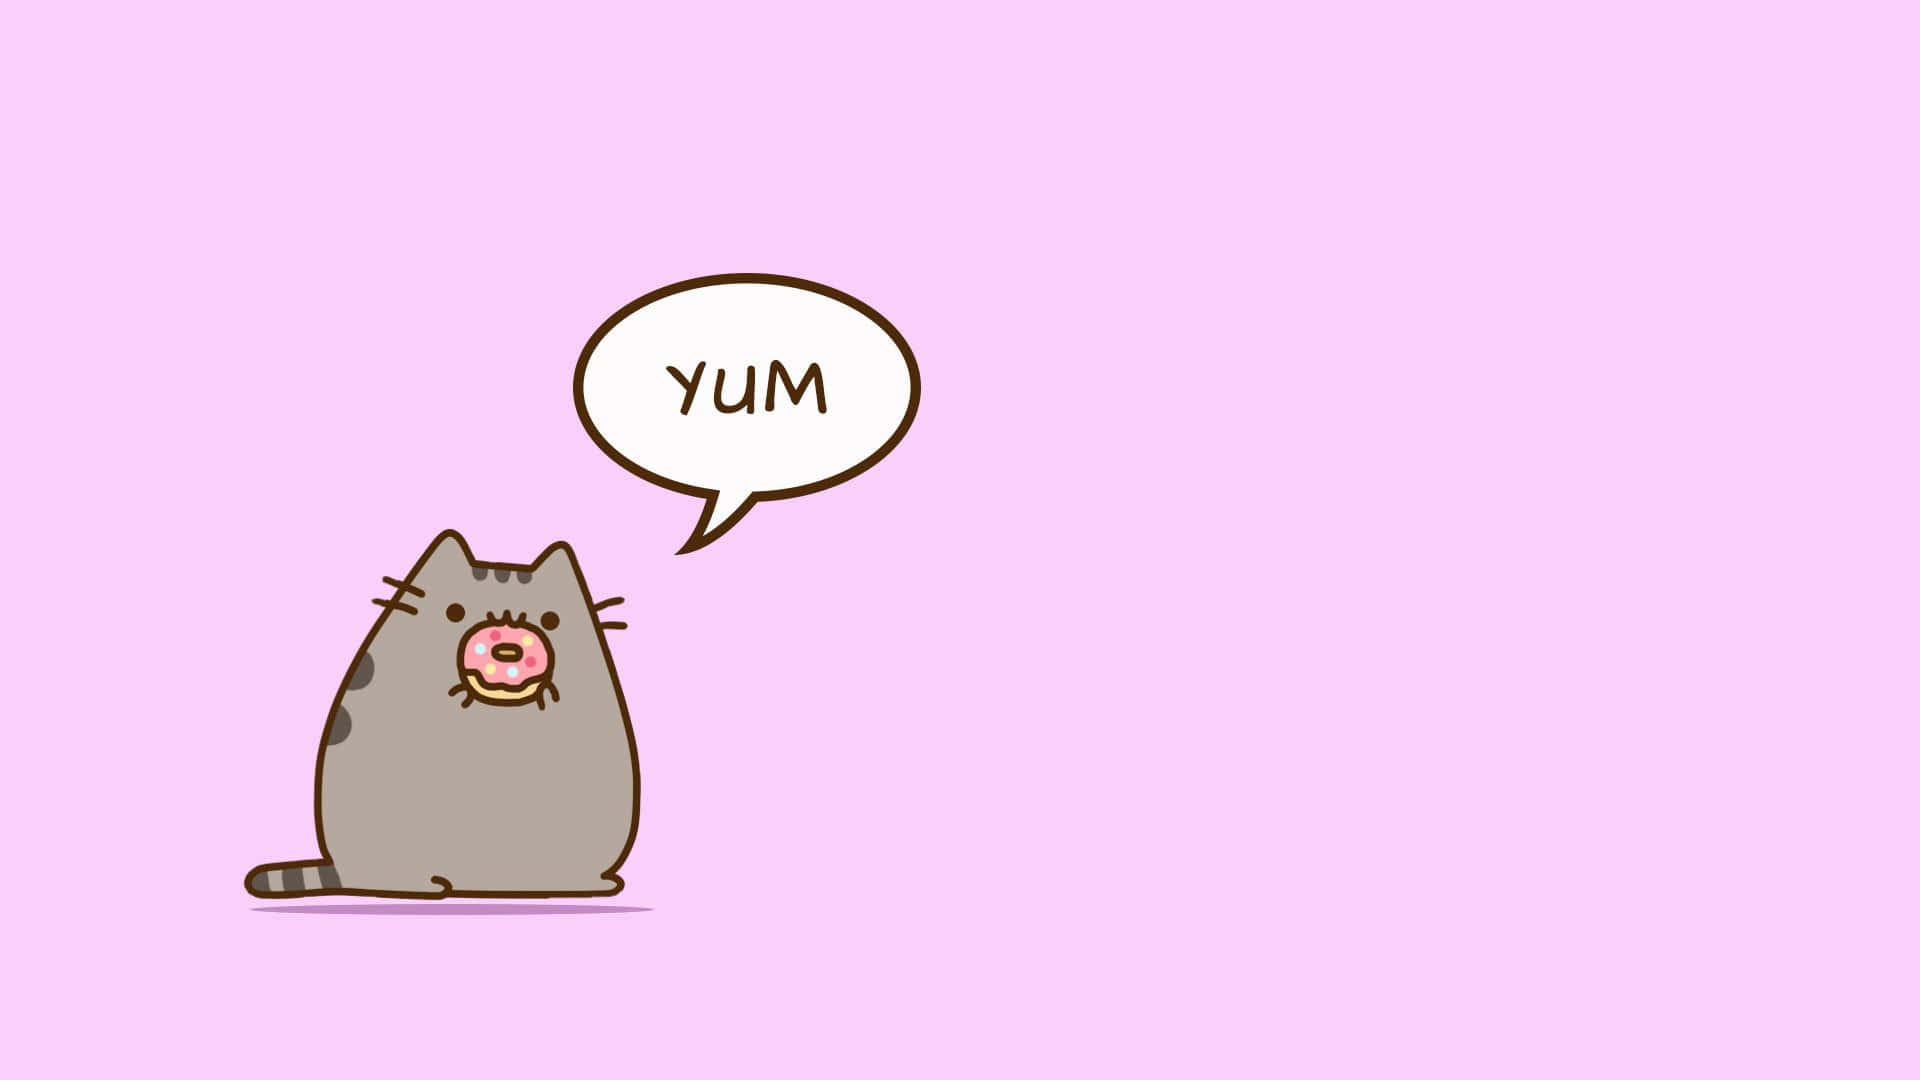 Cuteness overload with Pusheen the cat!